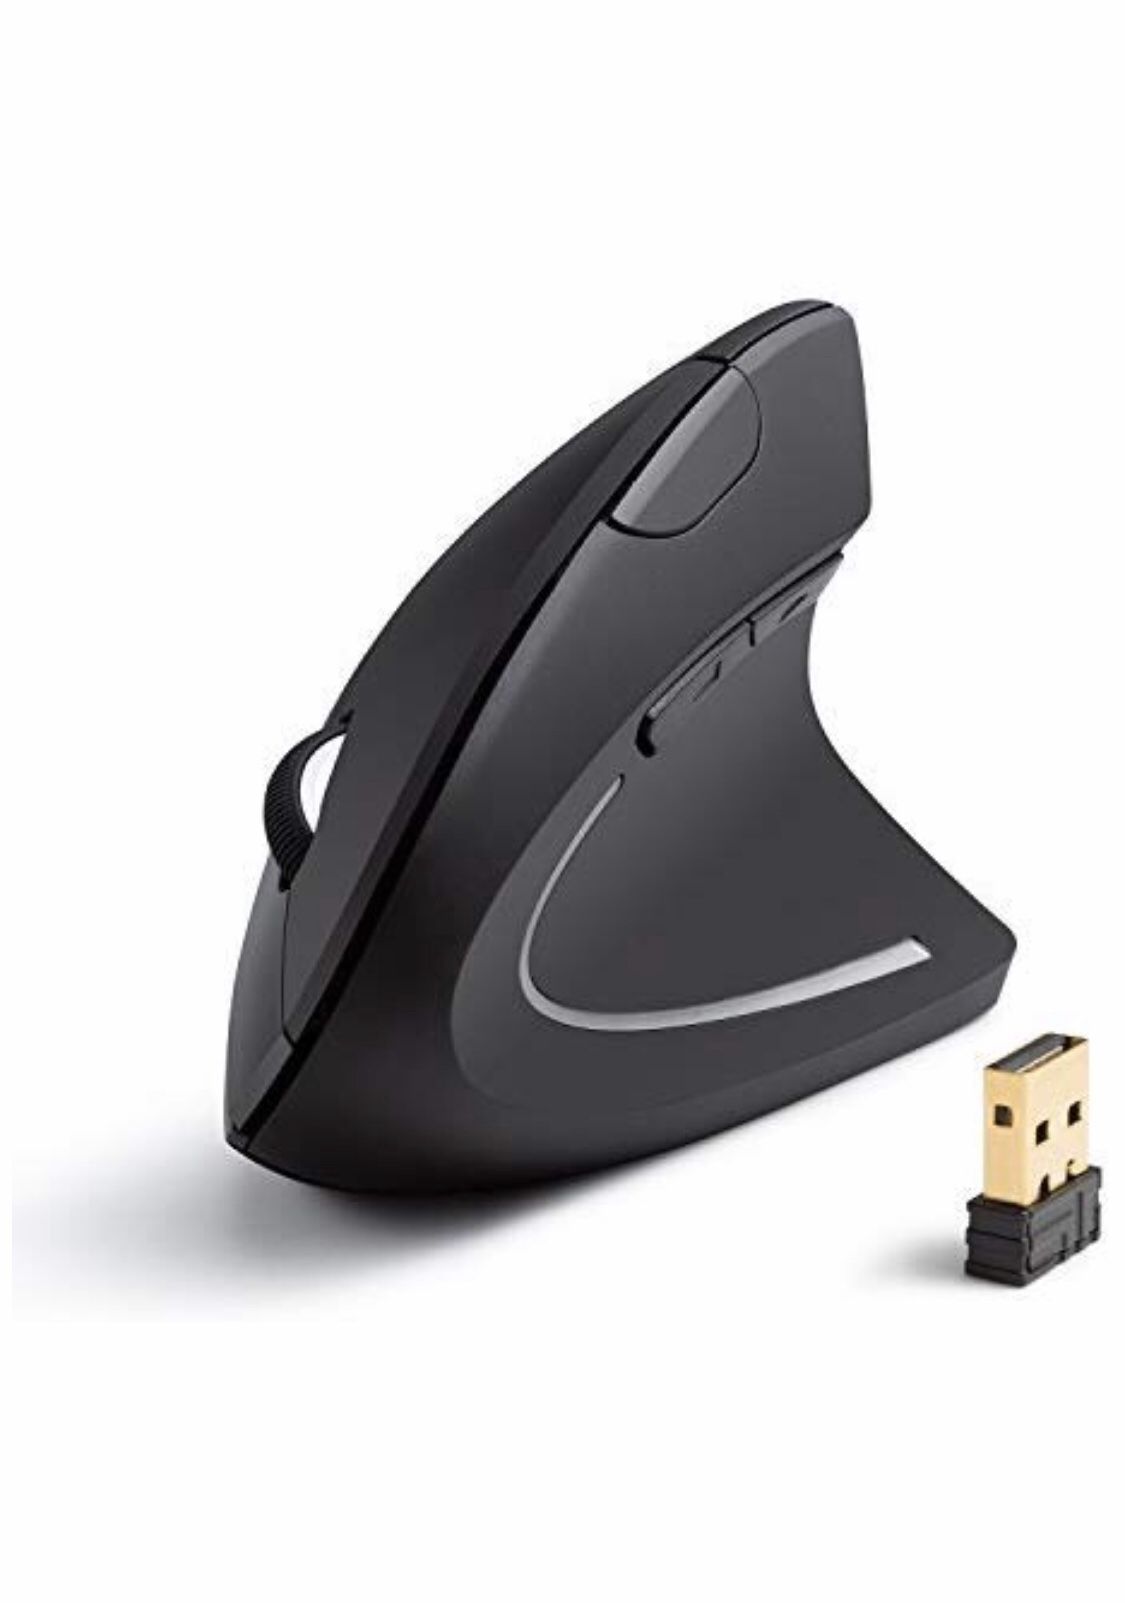 ANKER wireless mouse